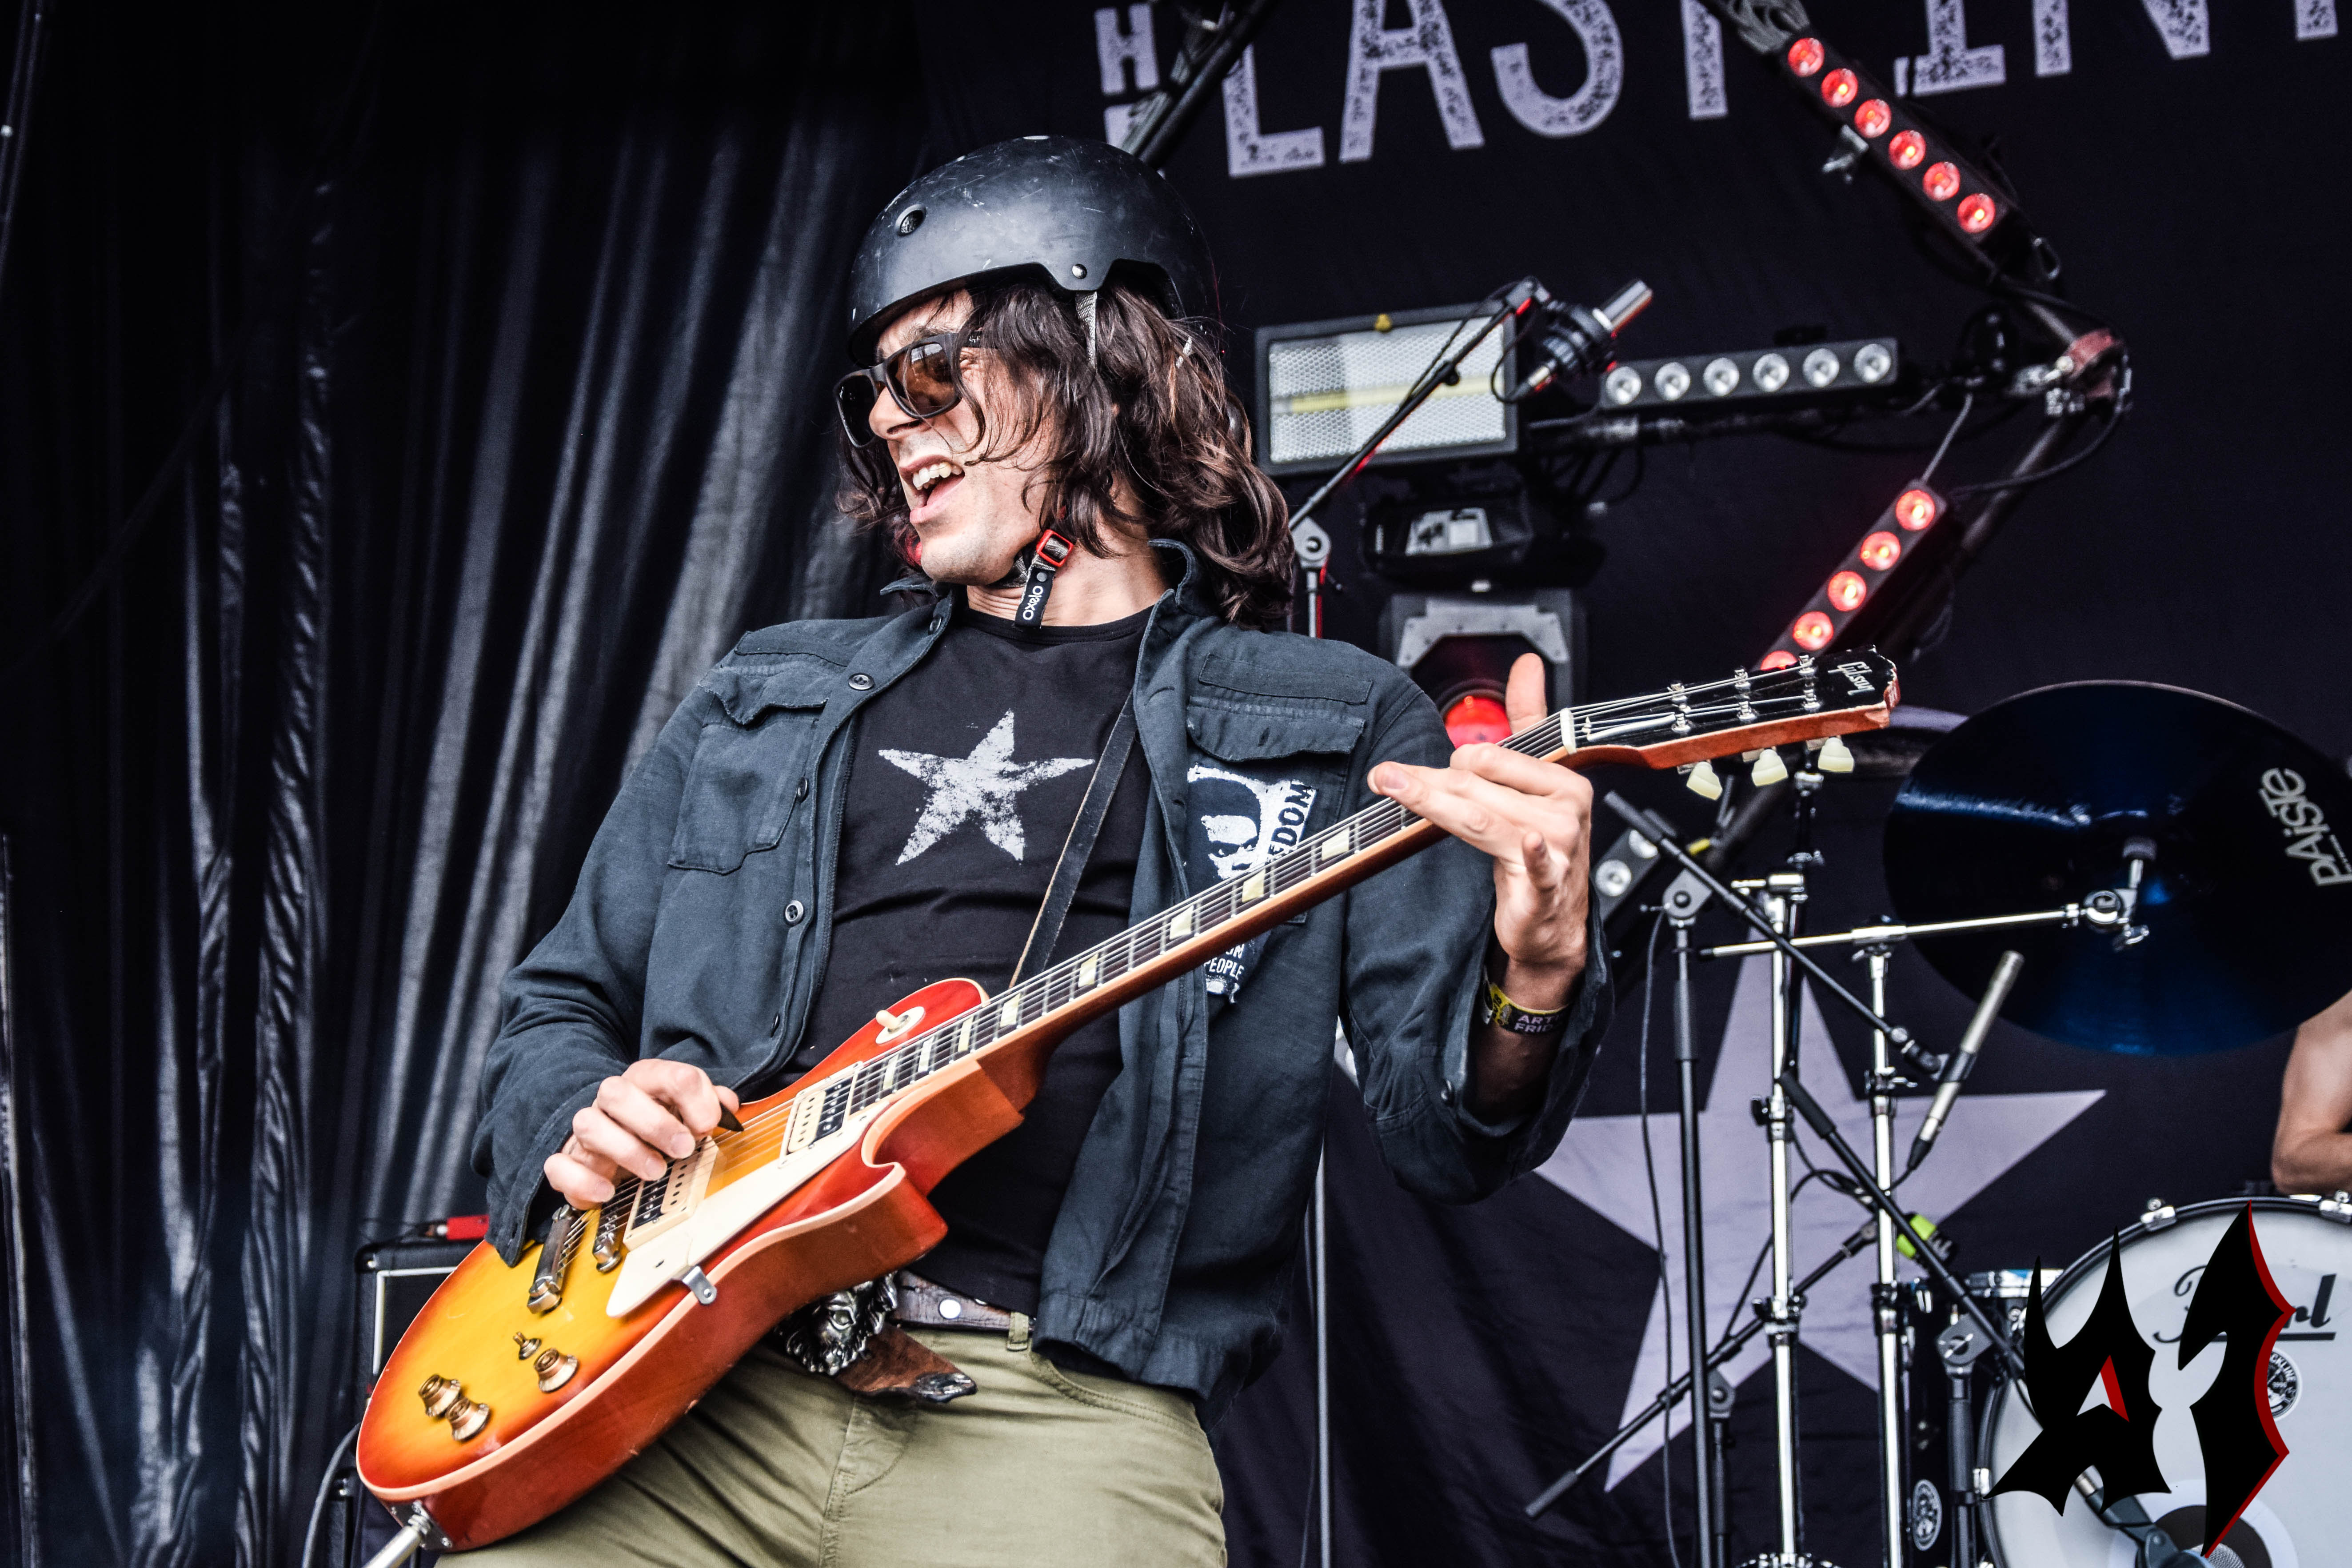 Donwload 2018 – Day 3 - The Last Internationale 9